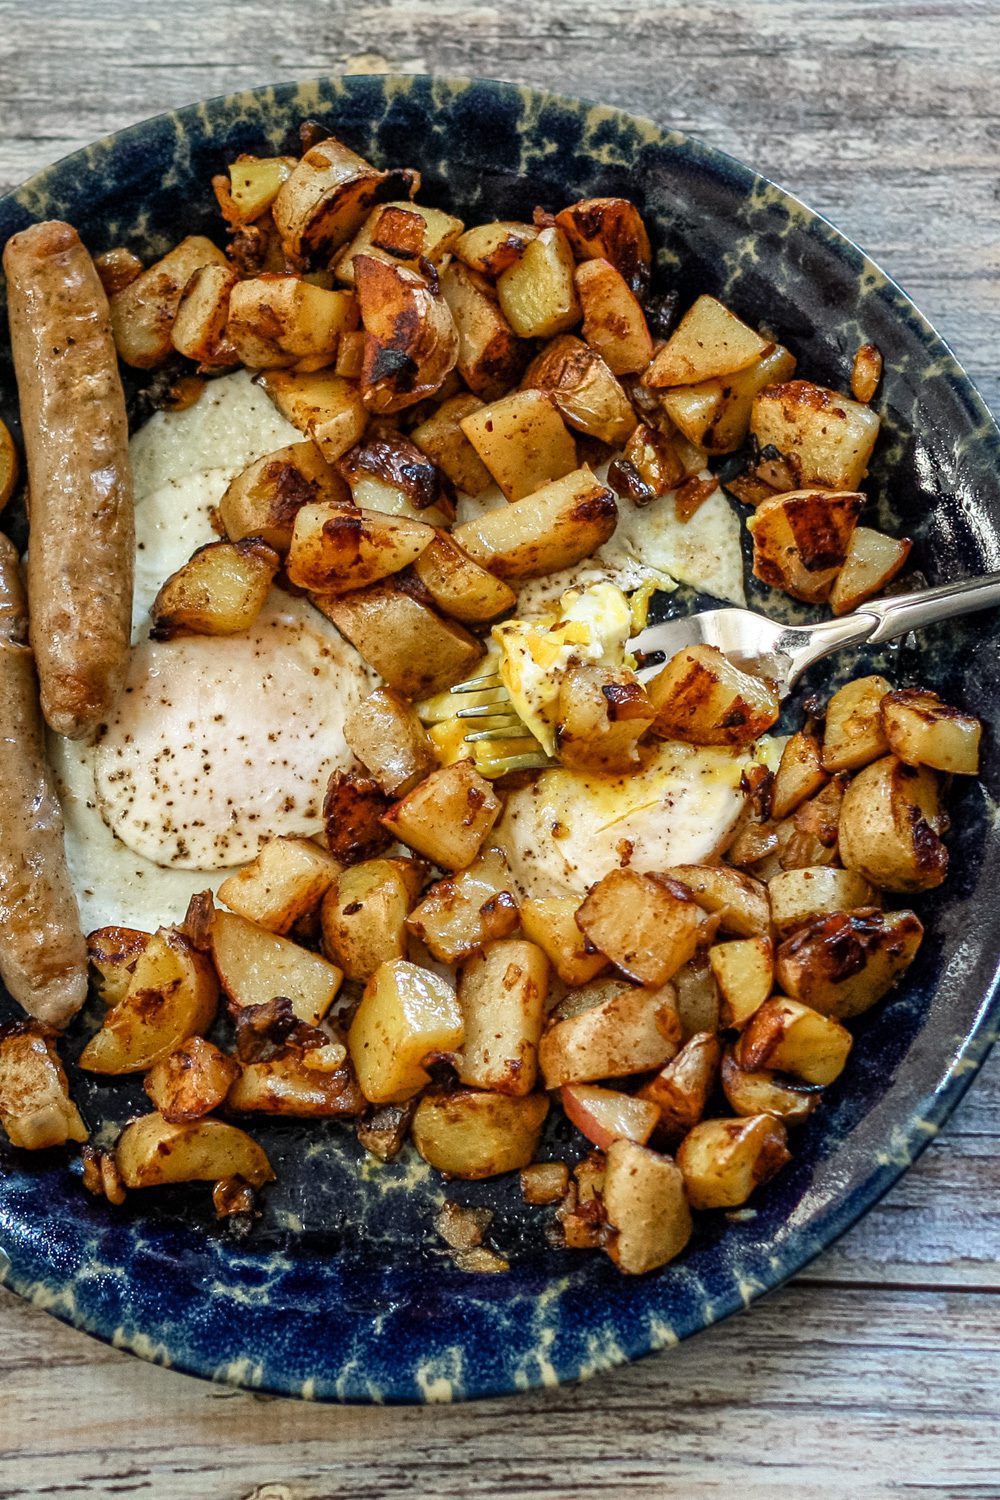 skillet home fries shown in a plate with eggs and sausages